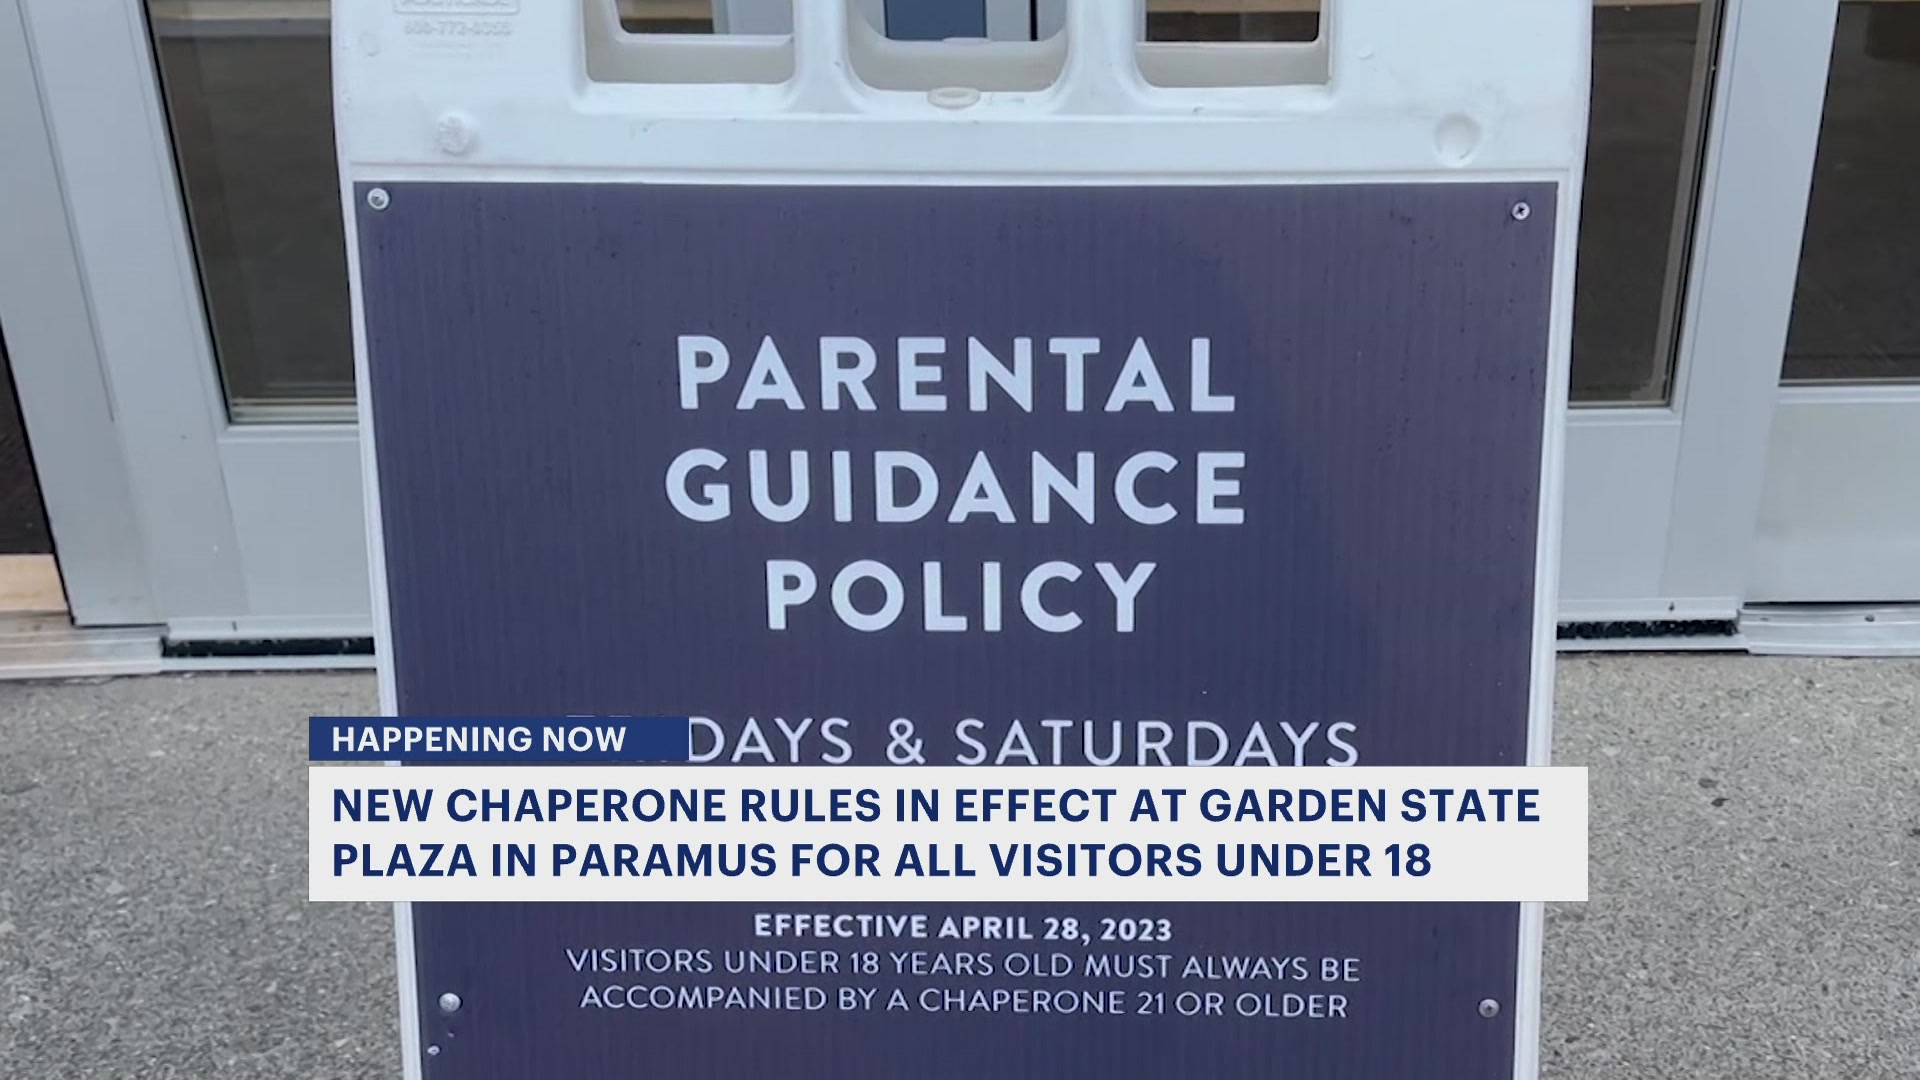 Westfield Garden State Plaza implements new chaperone policy